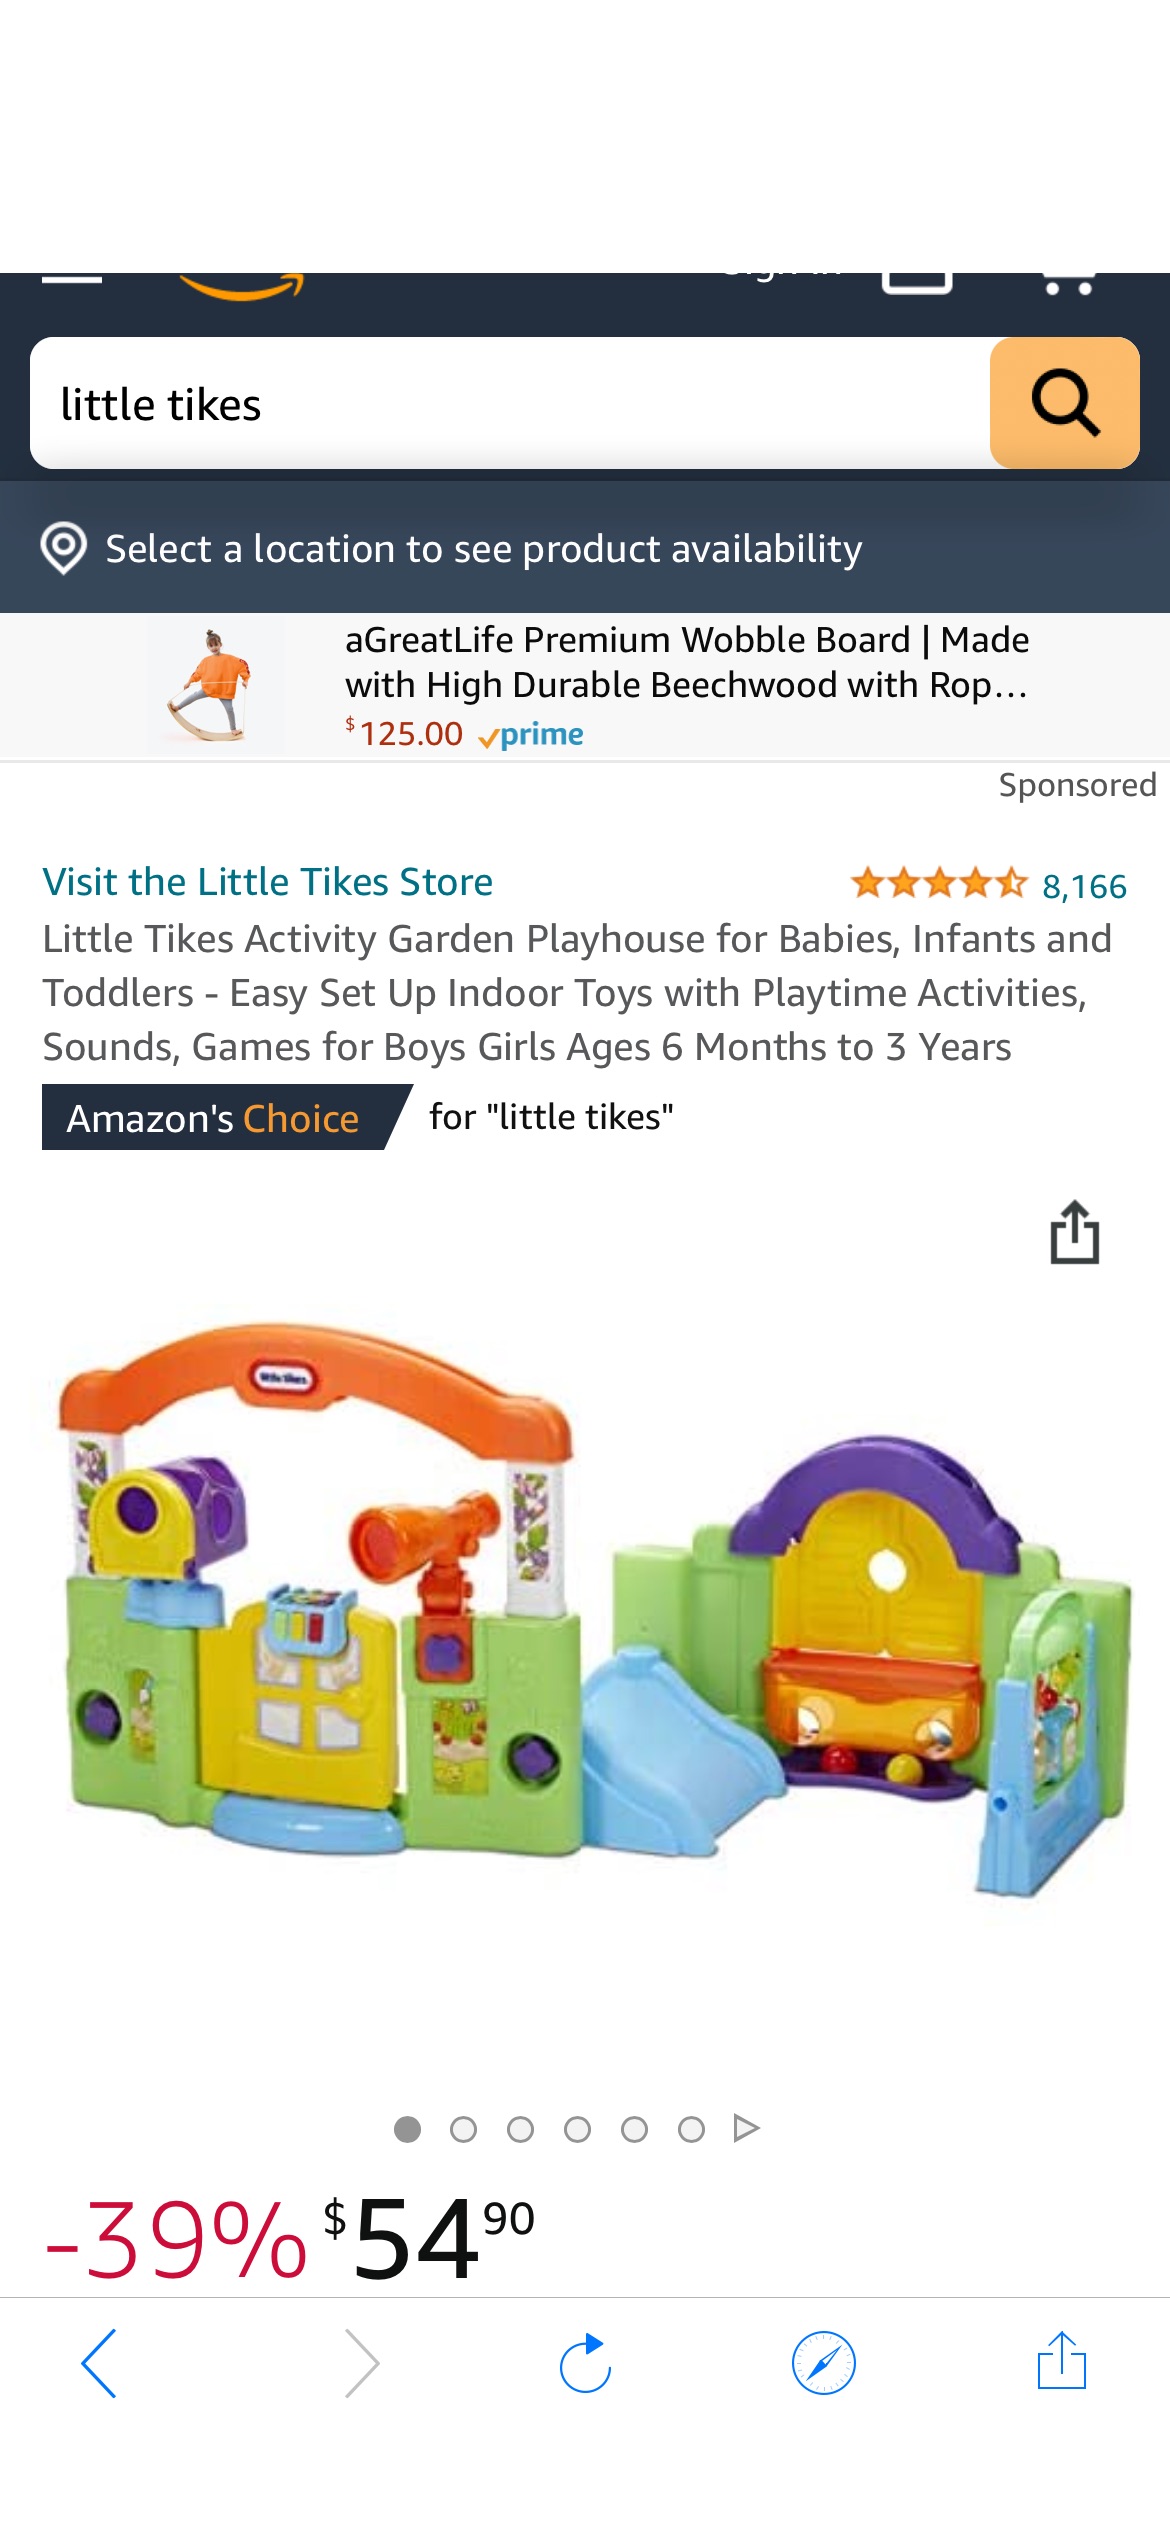 Amazon.com: Little Tikes Activity Garden Playhouse for Babies, Infants and Toddlers - Easy Set Up Indoor Toys with Playtime Activities, little times 活动花园玩耍小屋